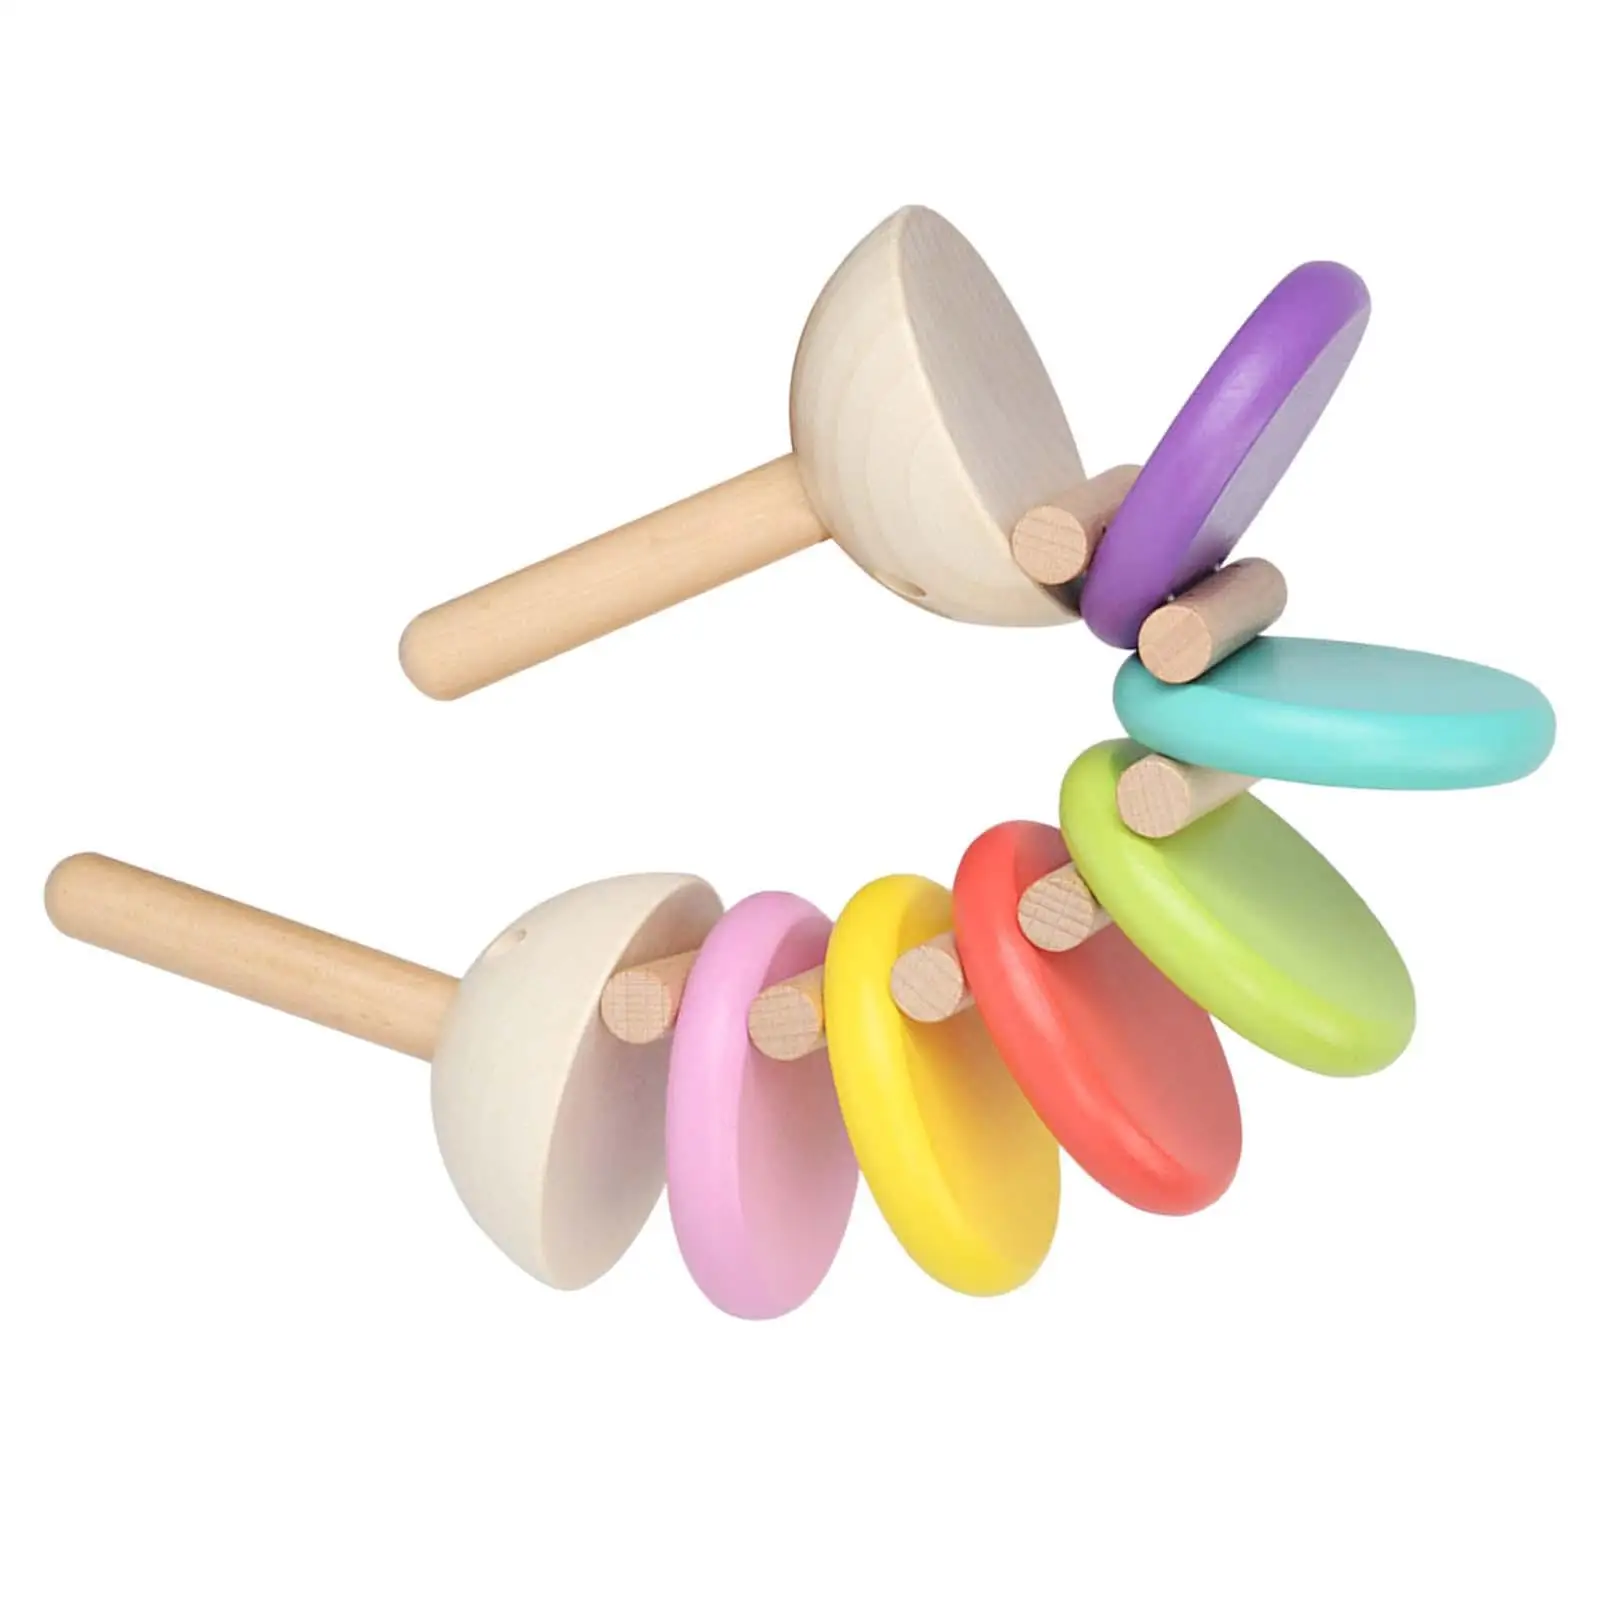 Wooden Castanets Music Enlightenment Education Rhythm Toy Hand Clappers for Festivals Nursery Holiday Kindergarten Birthday